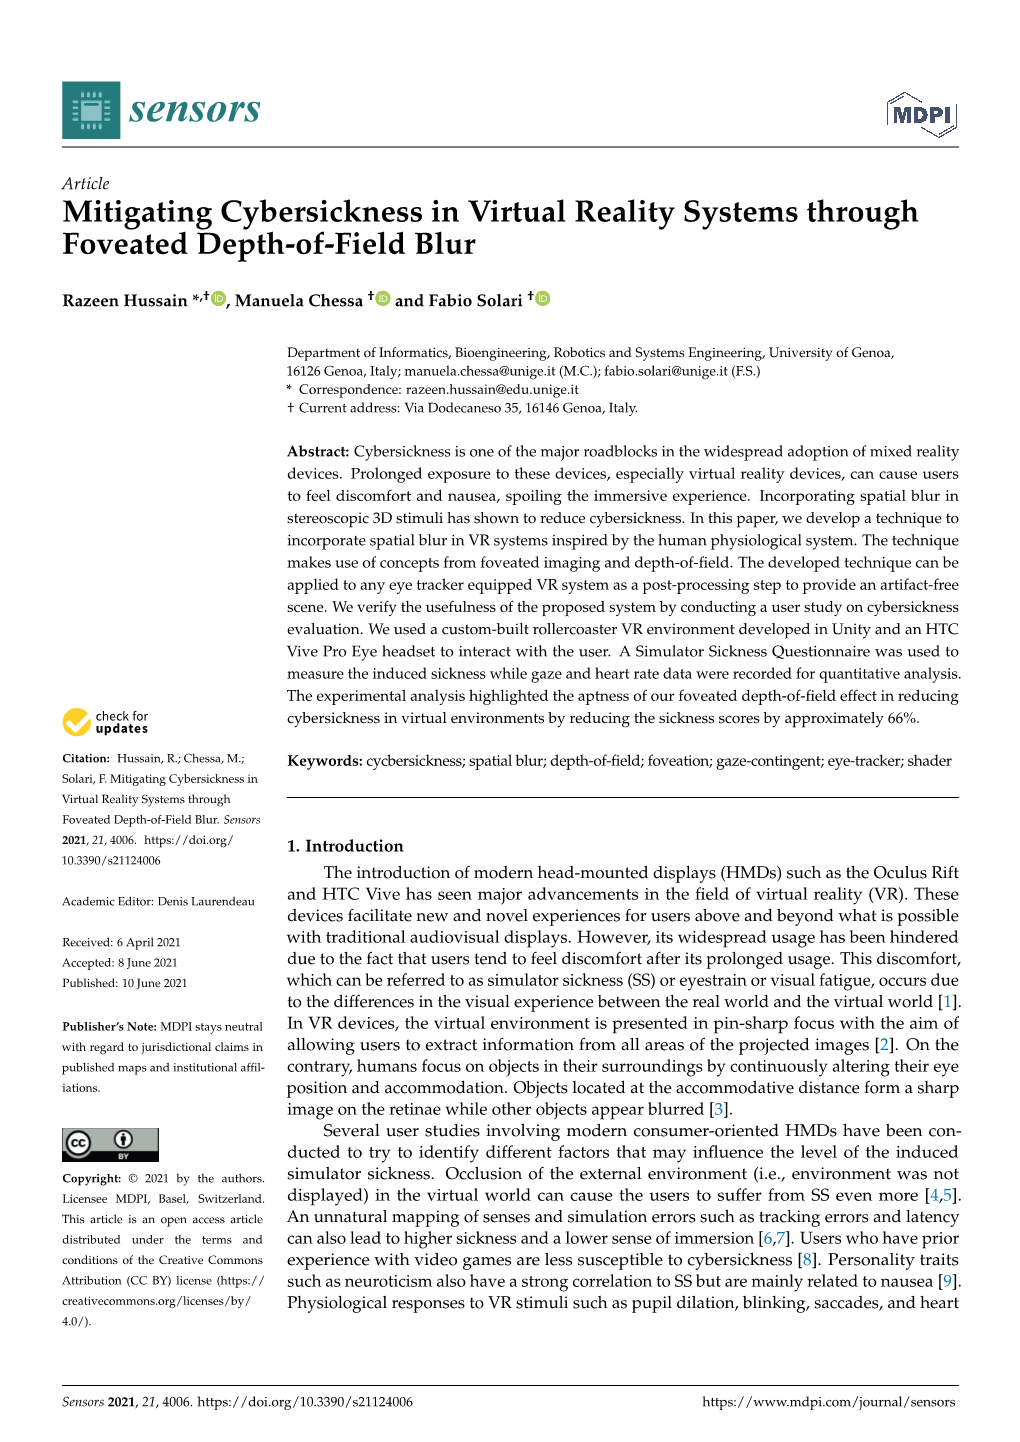 Mitigating Cybersickness in Virtual Reality Systems Through Foveated Depth-Of-Field Blur